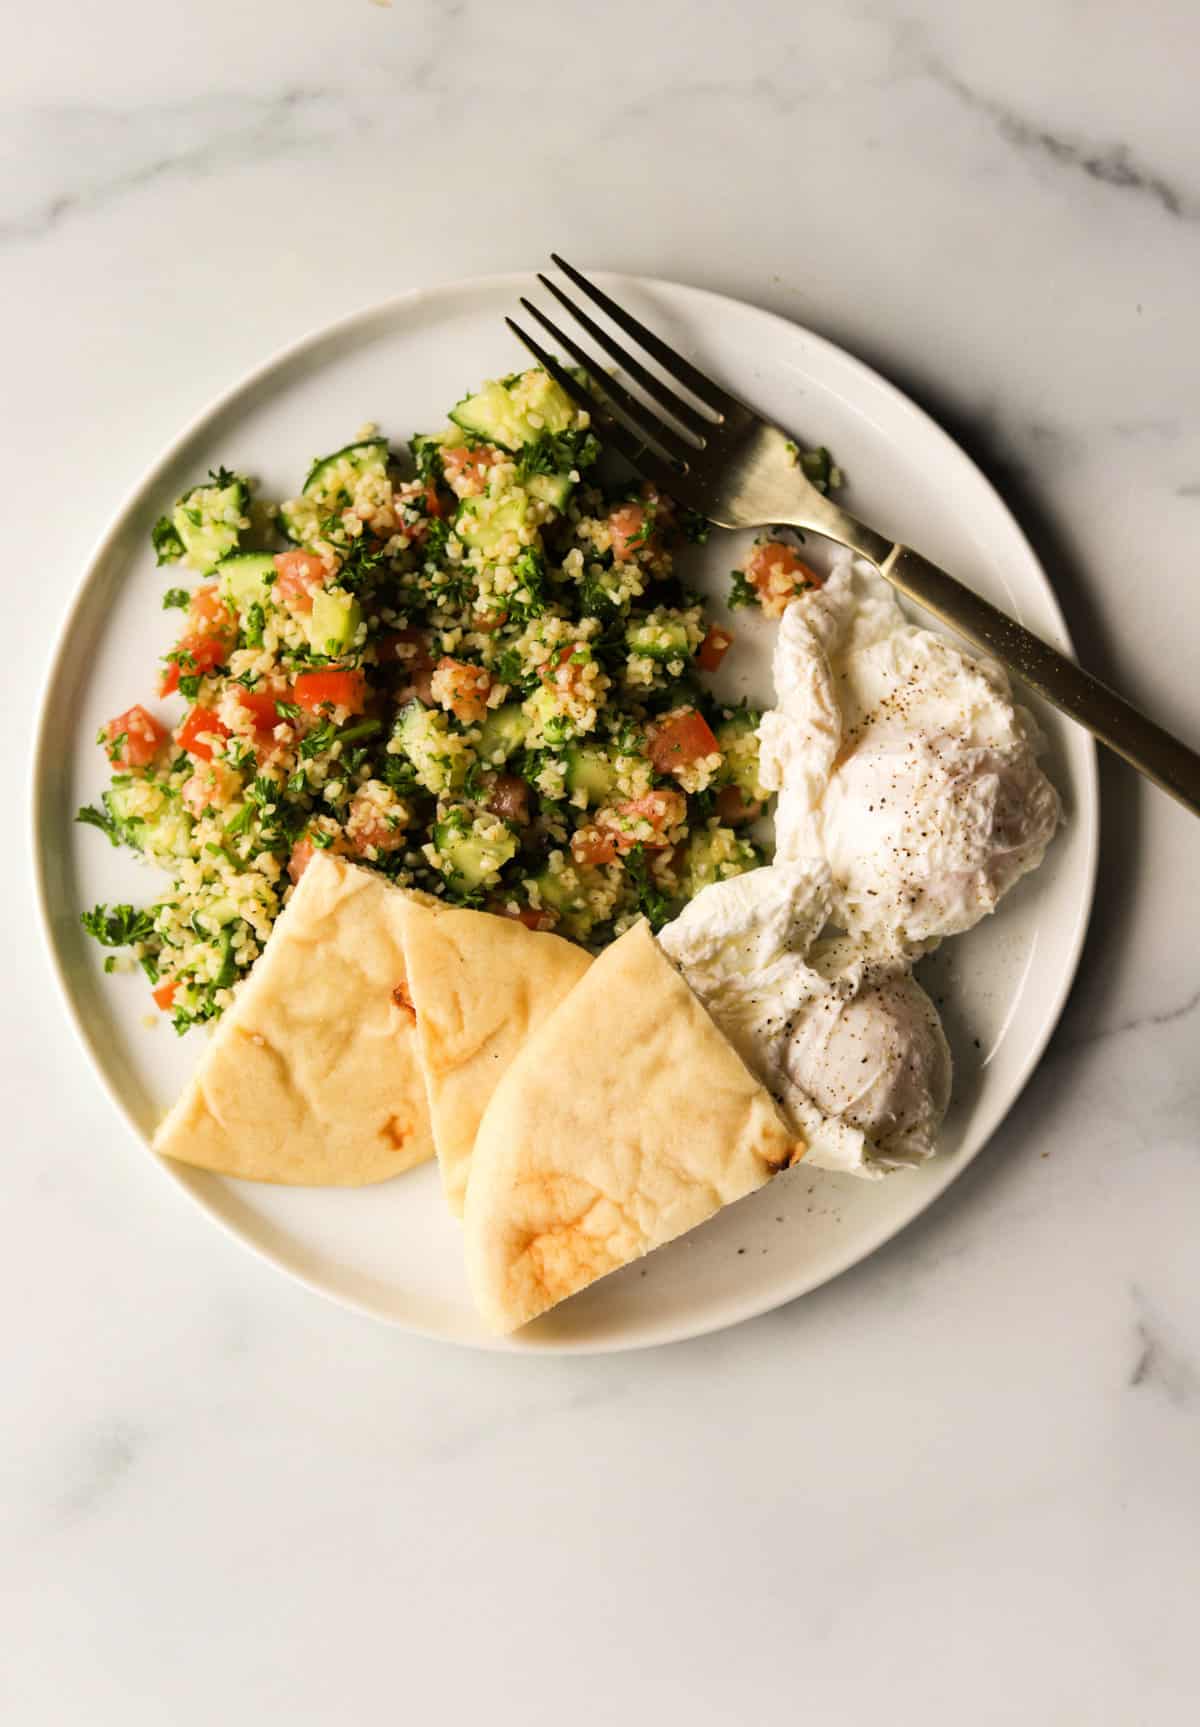 An overhead shot of a plate of tabouli with poached eggs and pita.